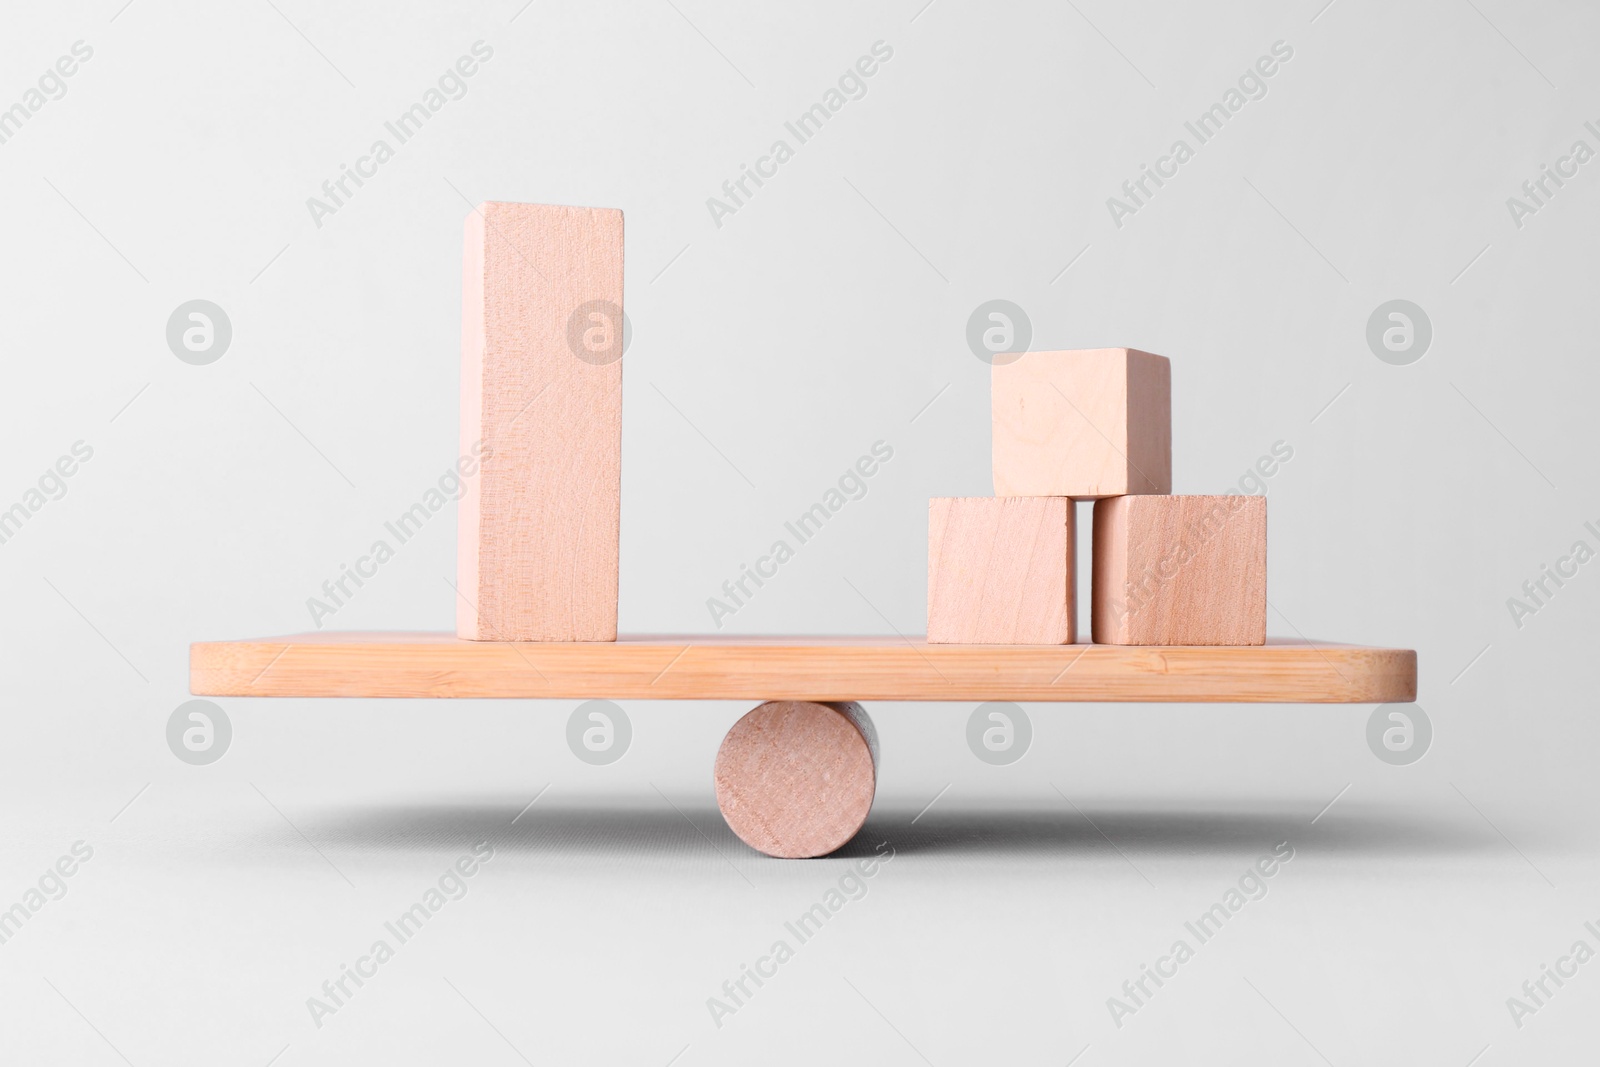 Photo of Equality concept. Seesaw scale with wooden blocks on light background